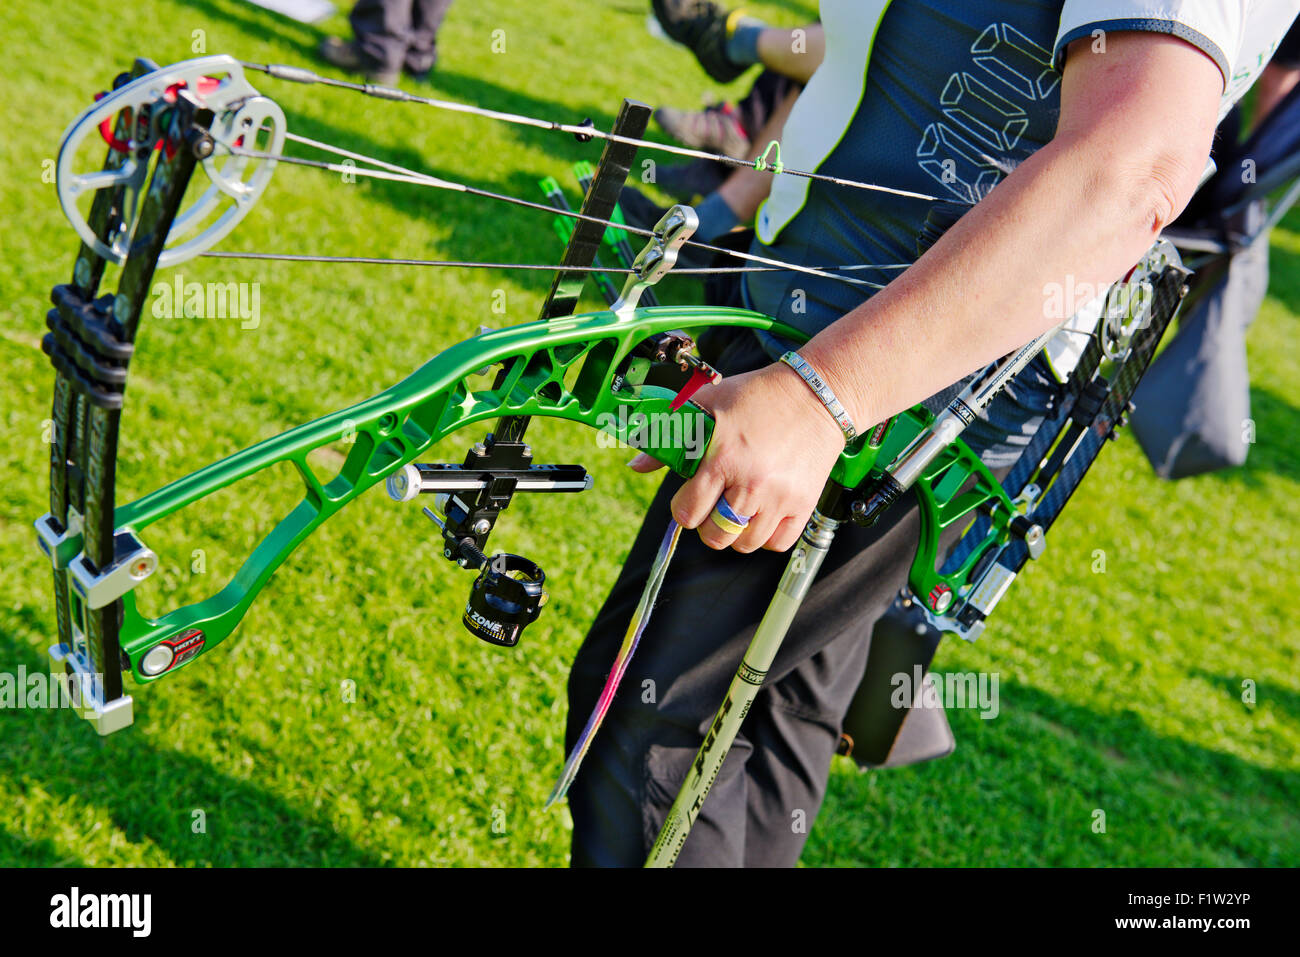 Archer holding compound bow Stock Photo